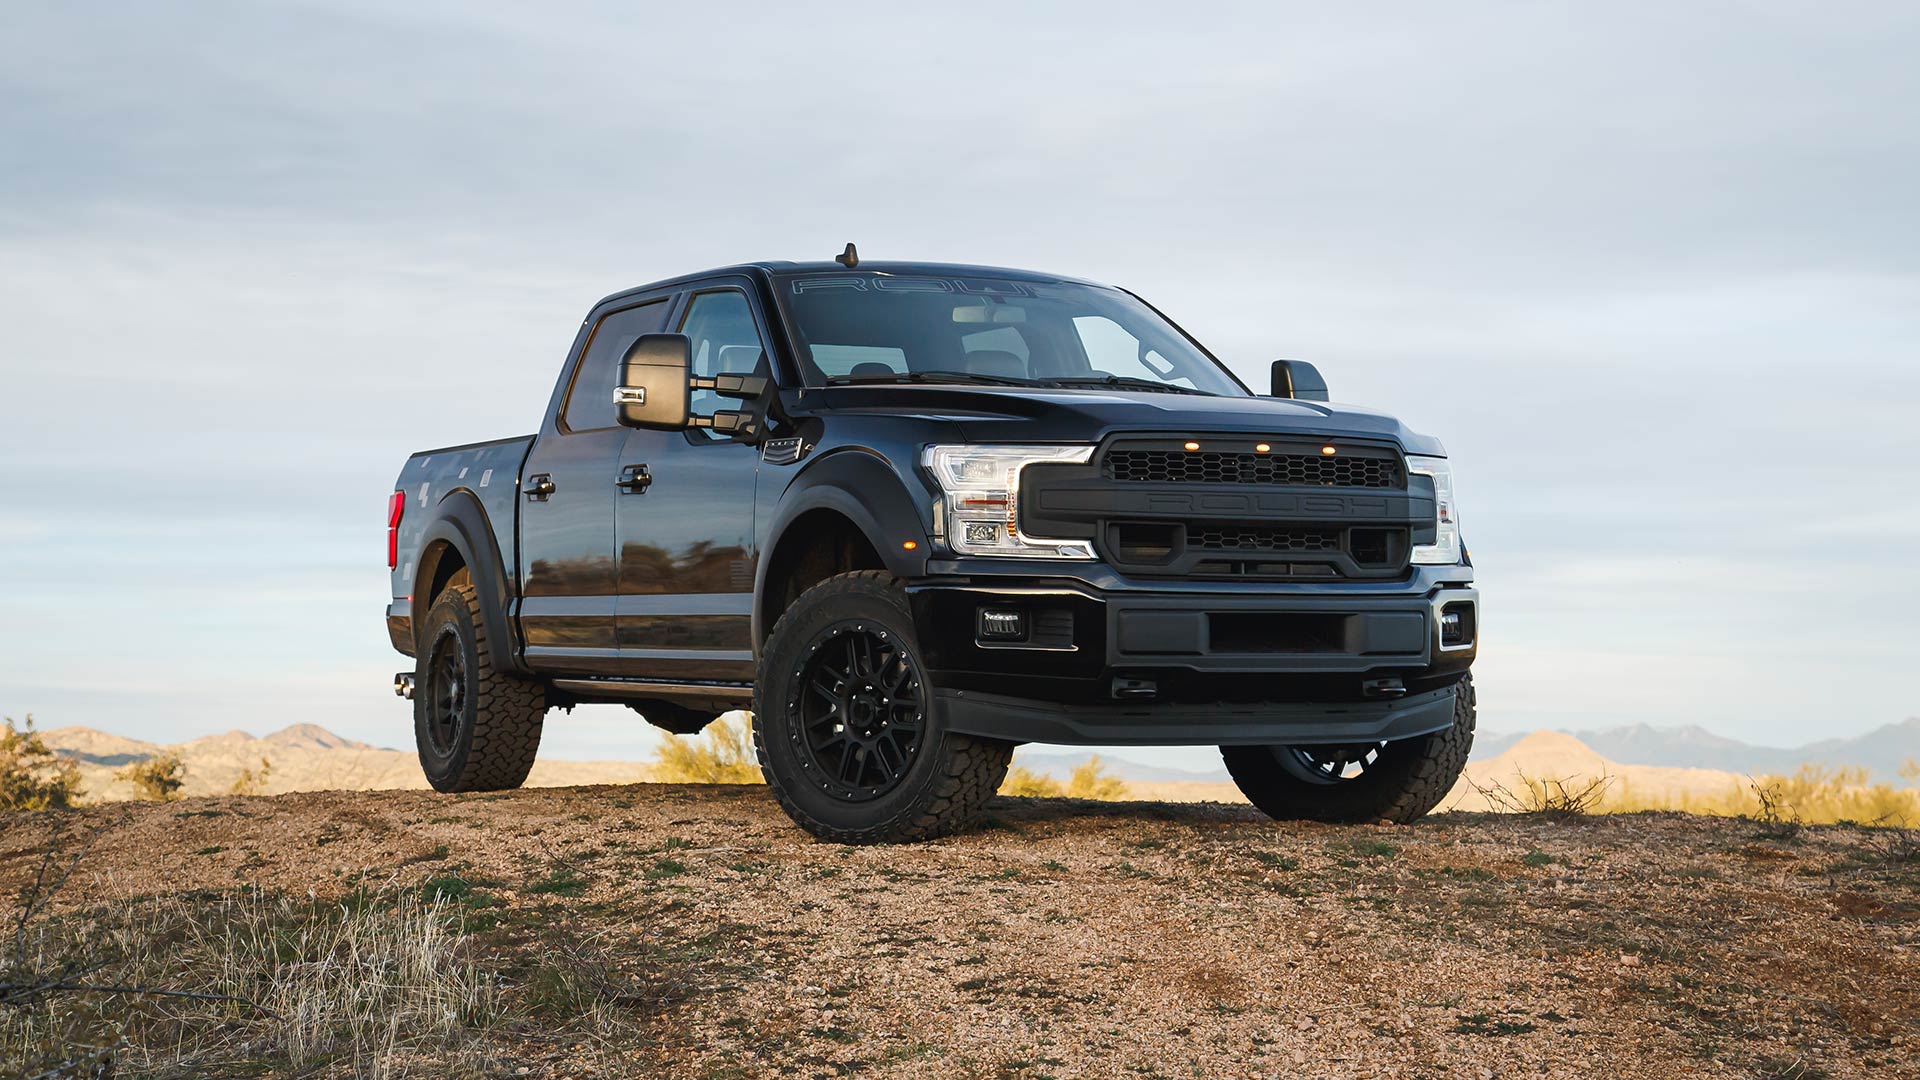 Roush F 150 5 11 Tactical Edition Is A 650 Hp Truck Ready For Anything Motoring Research